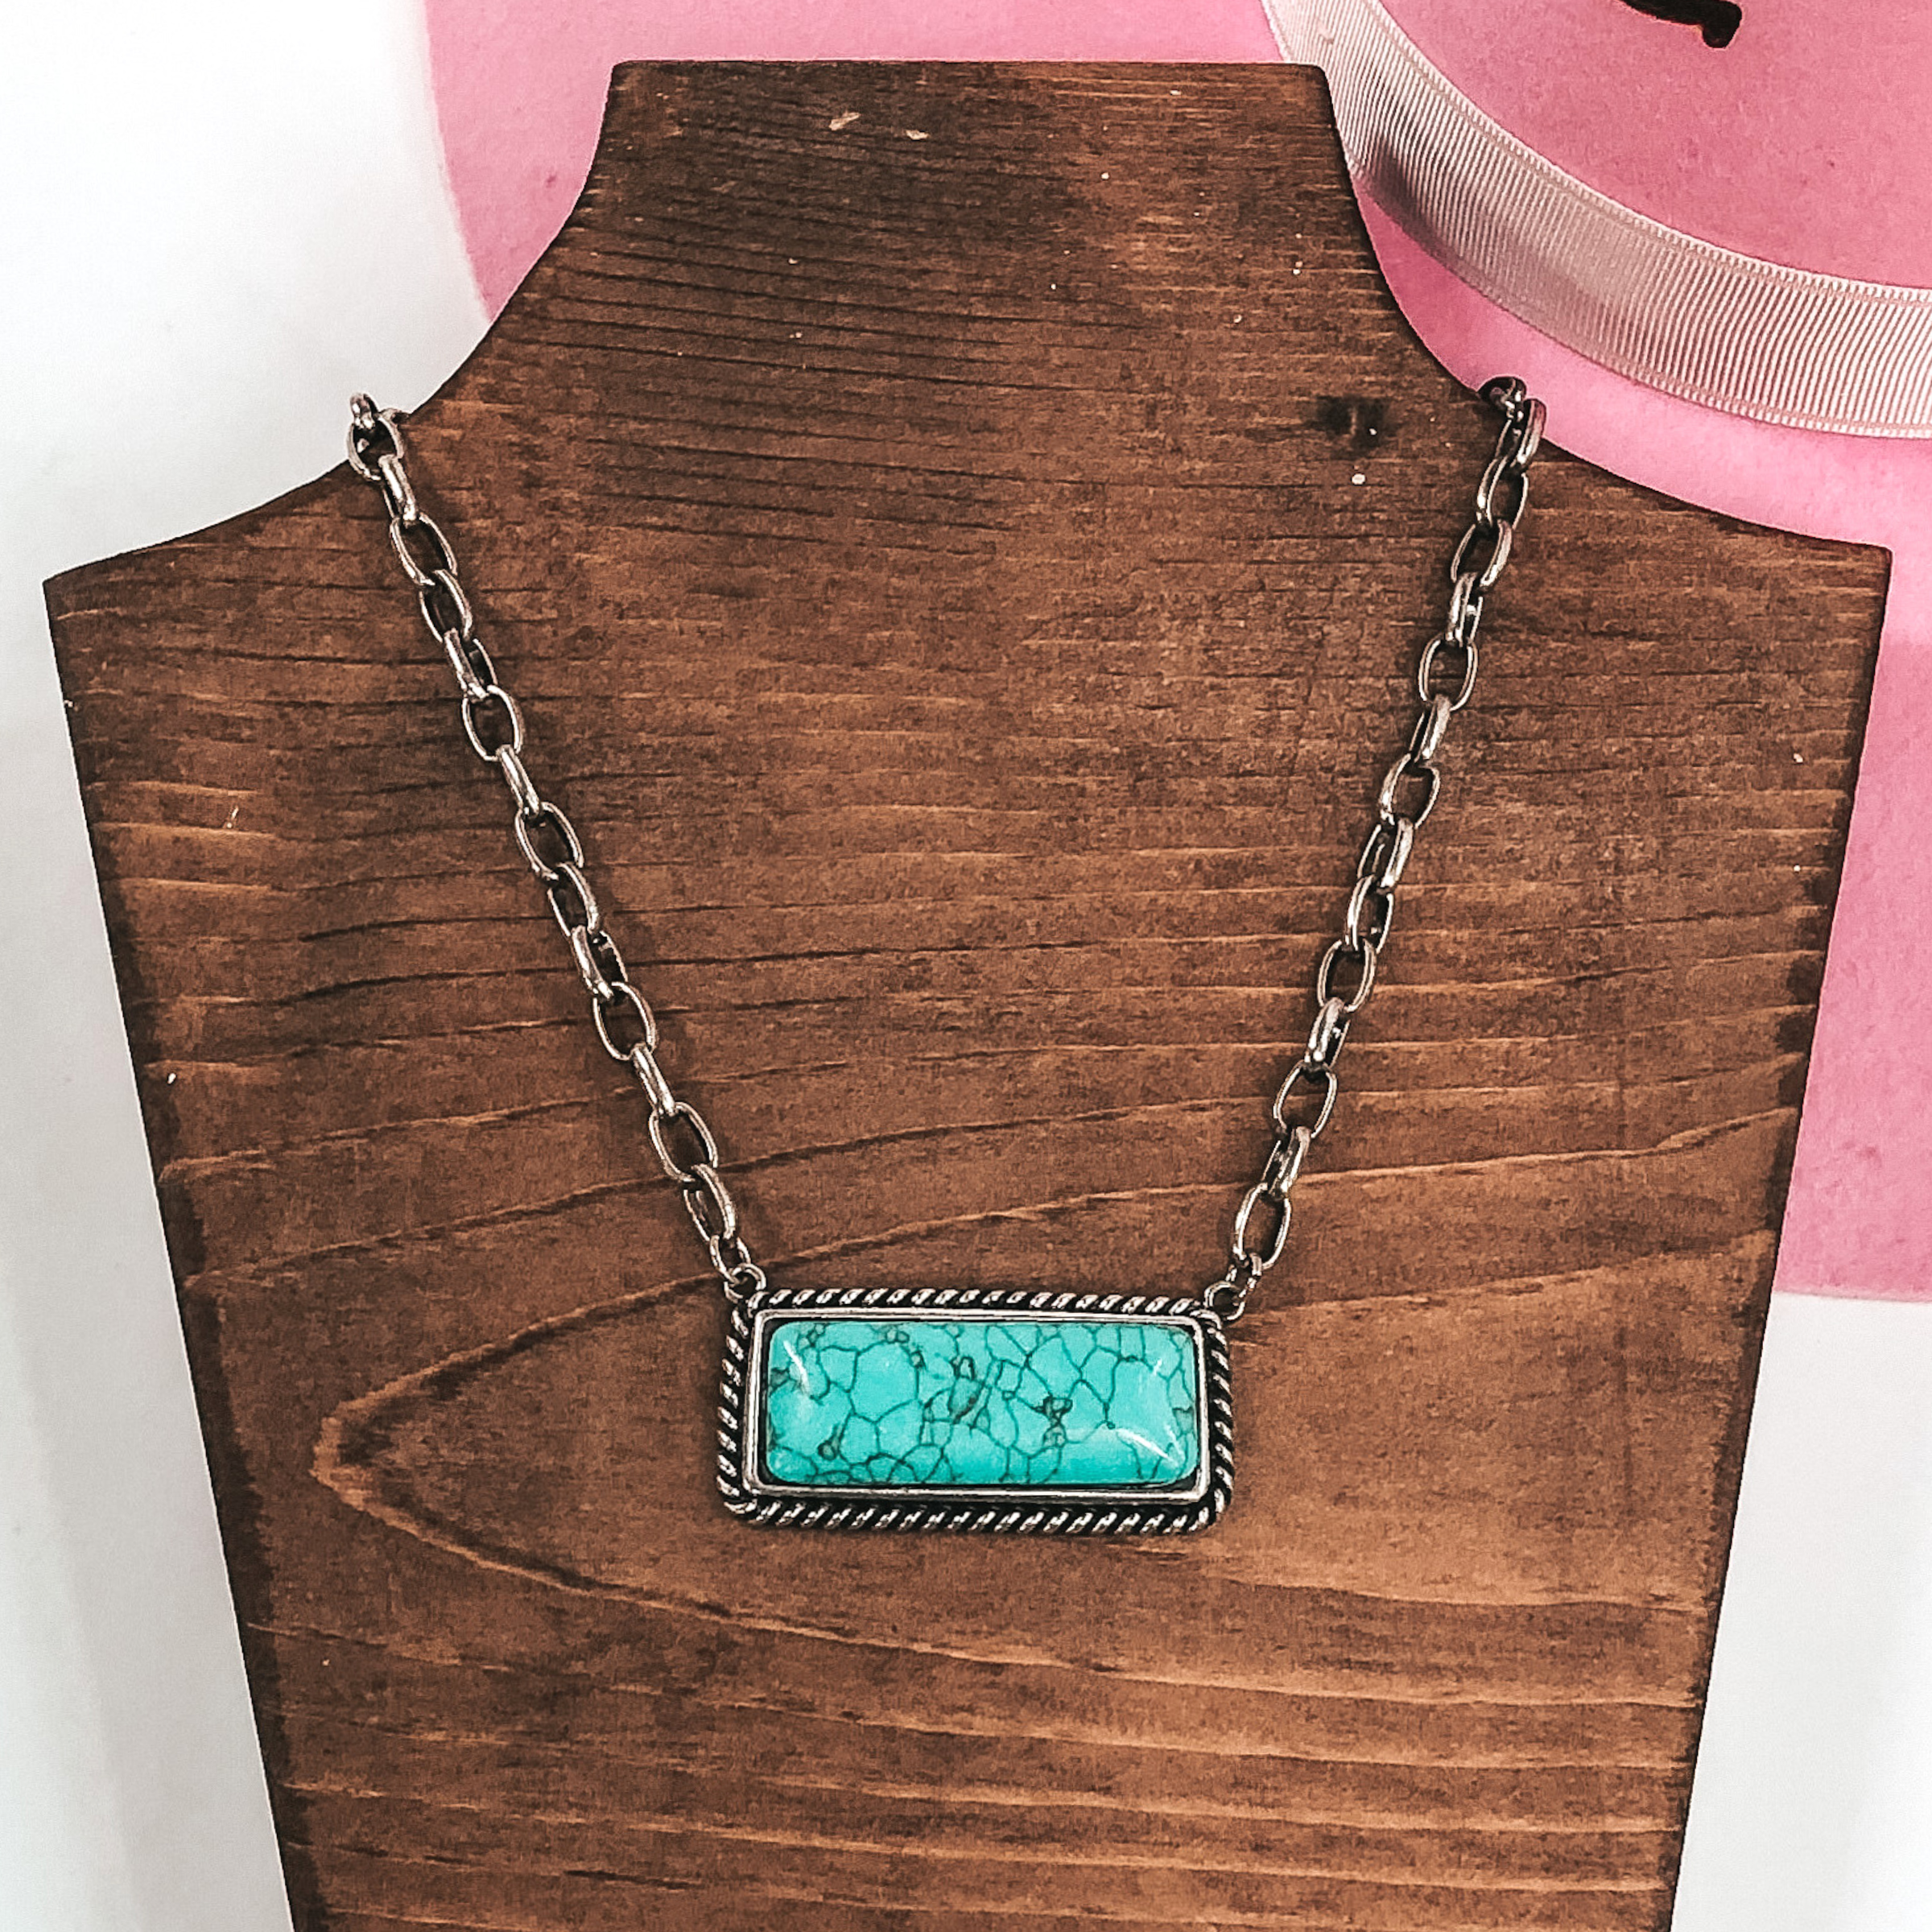 This is a Navajo inspired bar necklace. This necklace includes an oval, silver chained necklace with a bar pendant. The bar pendant is outlined in a silver twist with a center, rectangle stone in turquoise. This necklace is pictured on a dark wood necklace holder on top of a pink hat on a white background. 